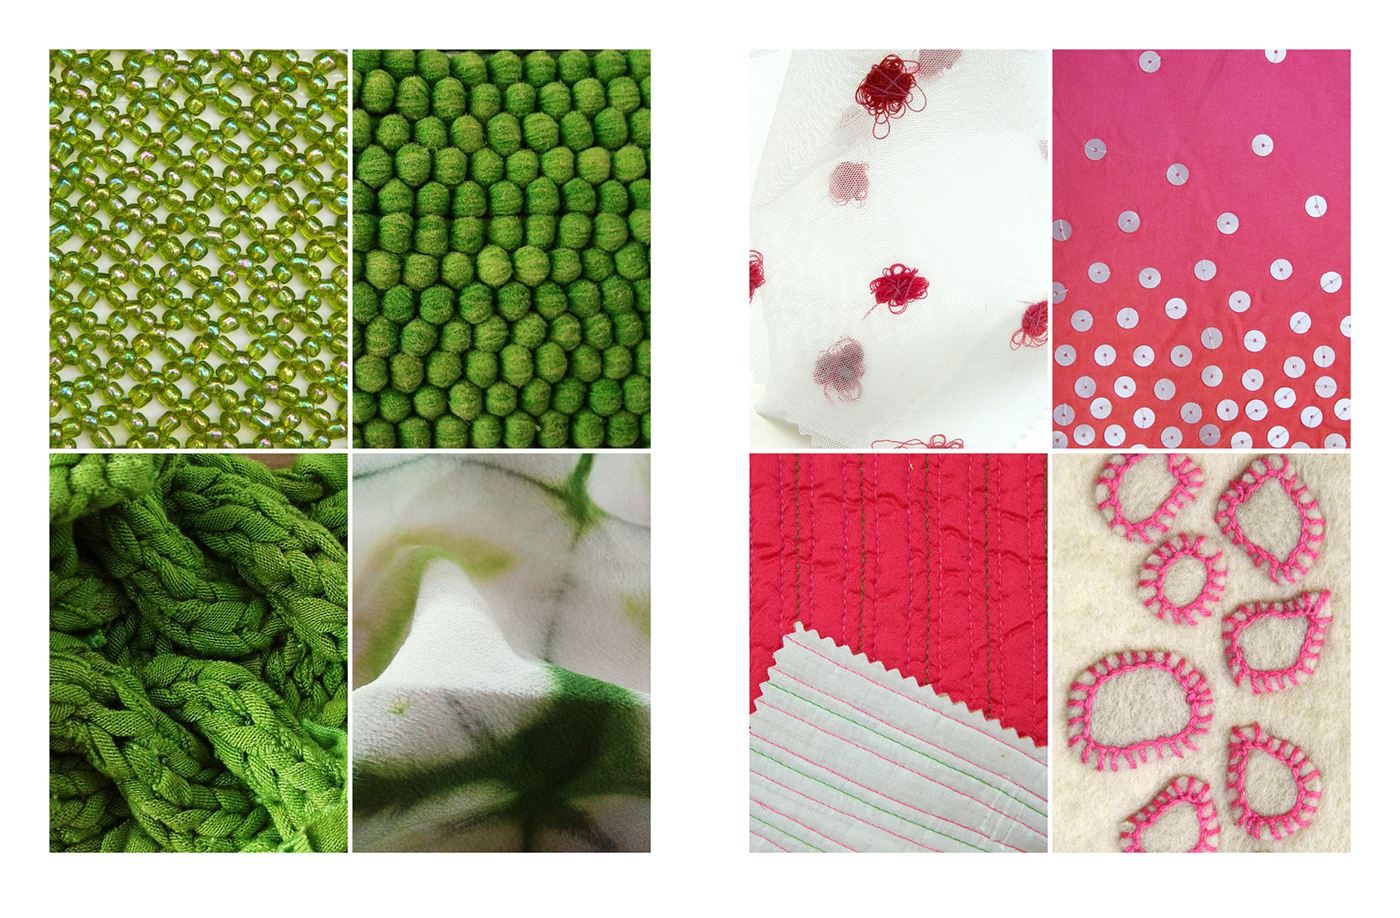 paper Textiles stitching knitting beading RECYCLED floral